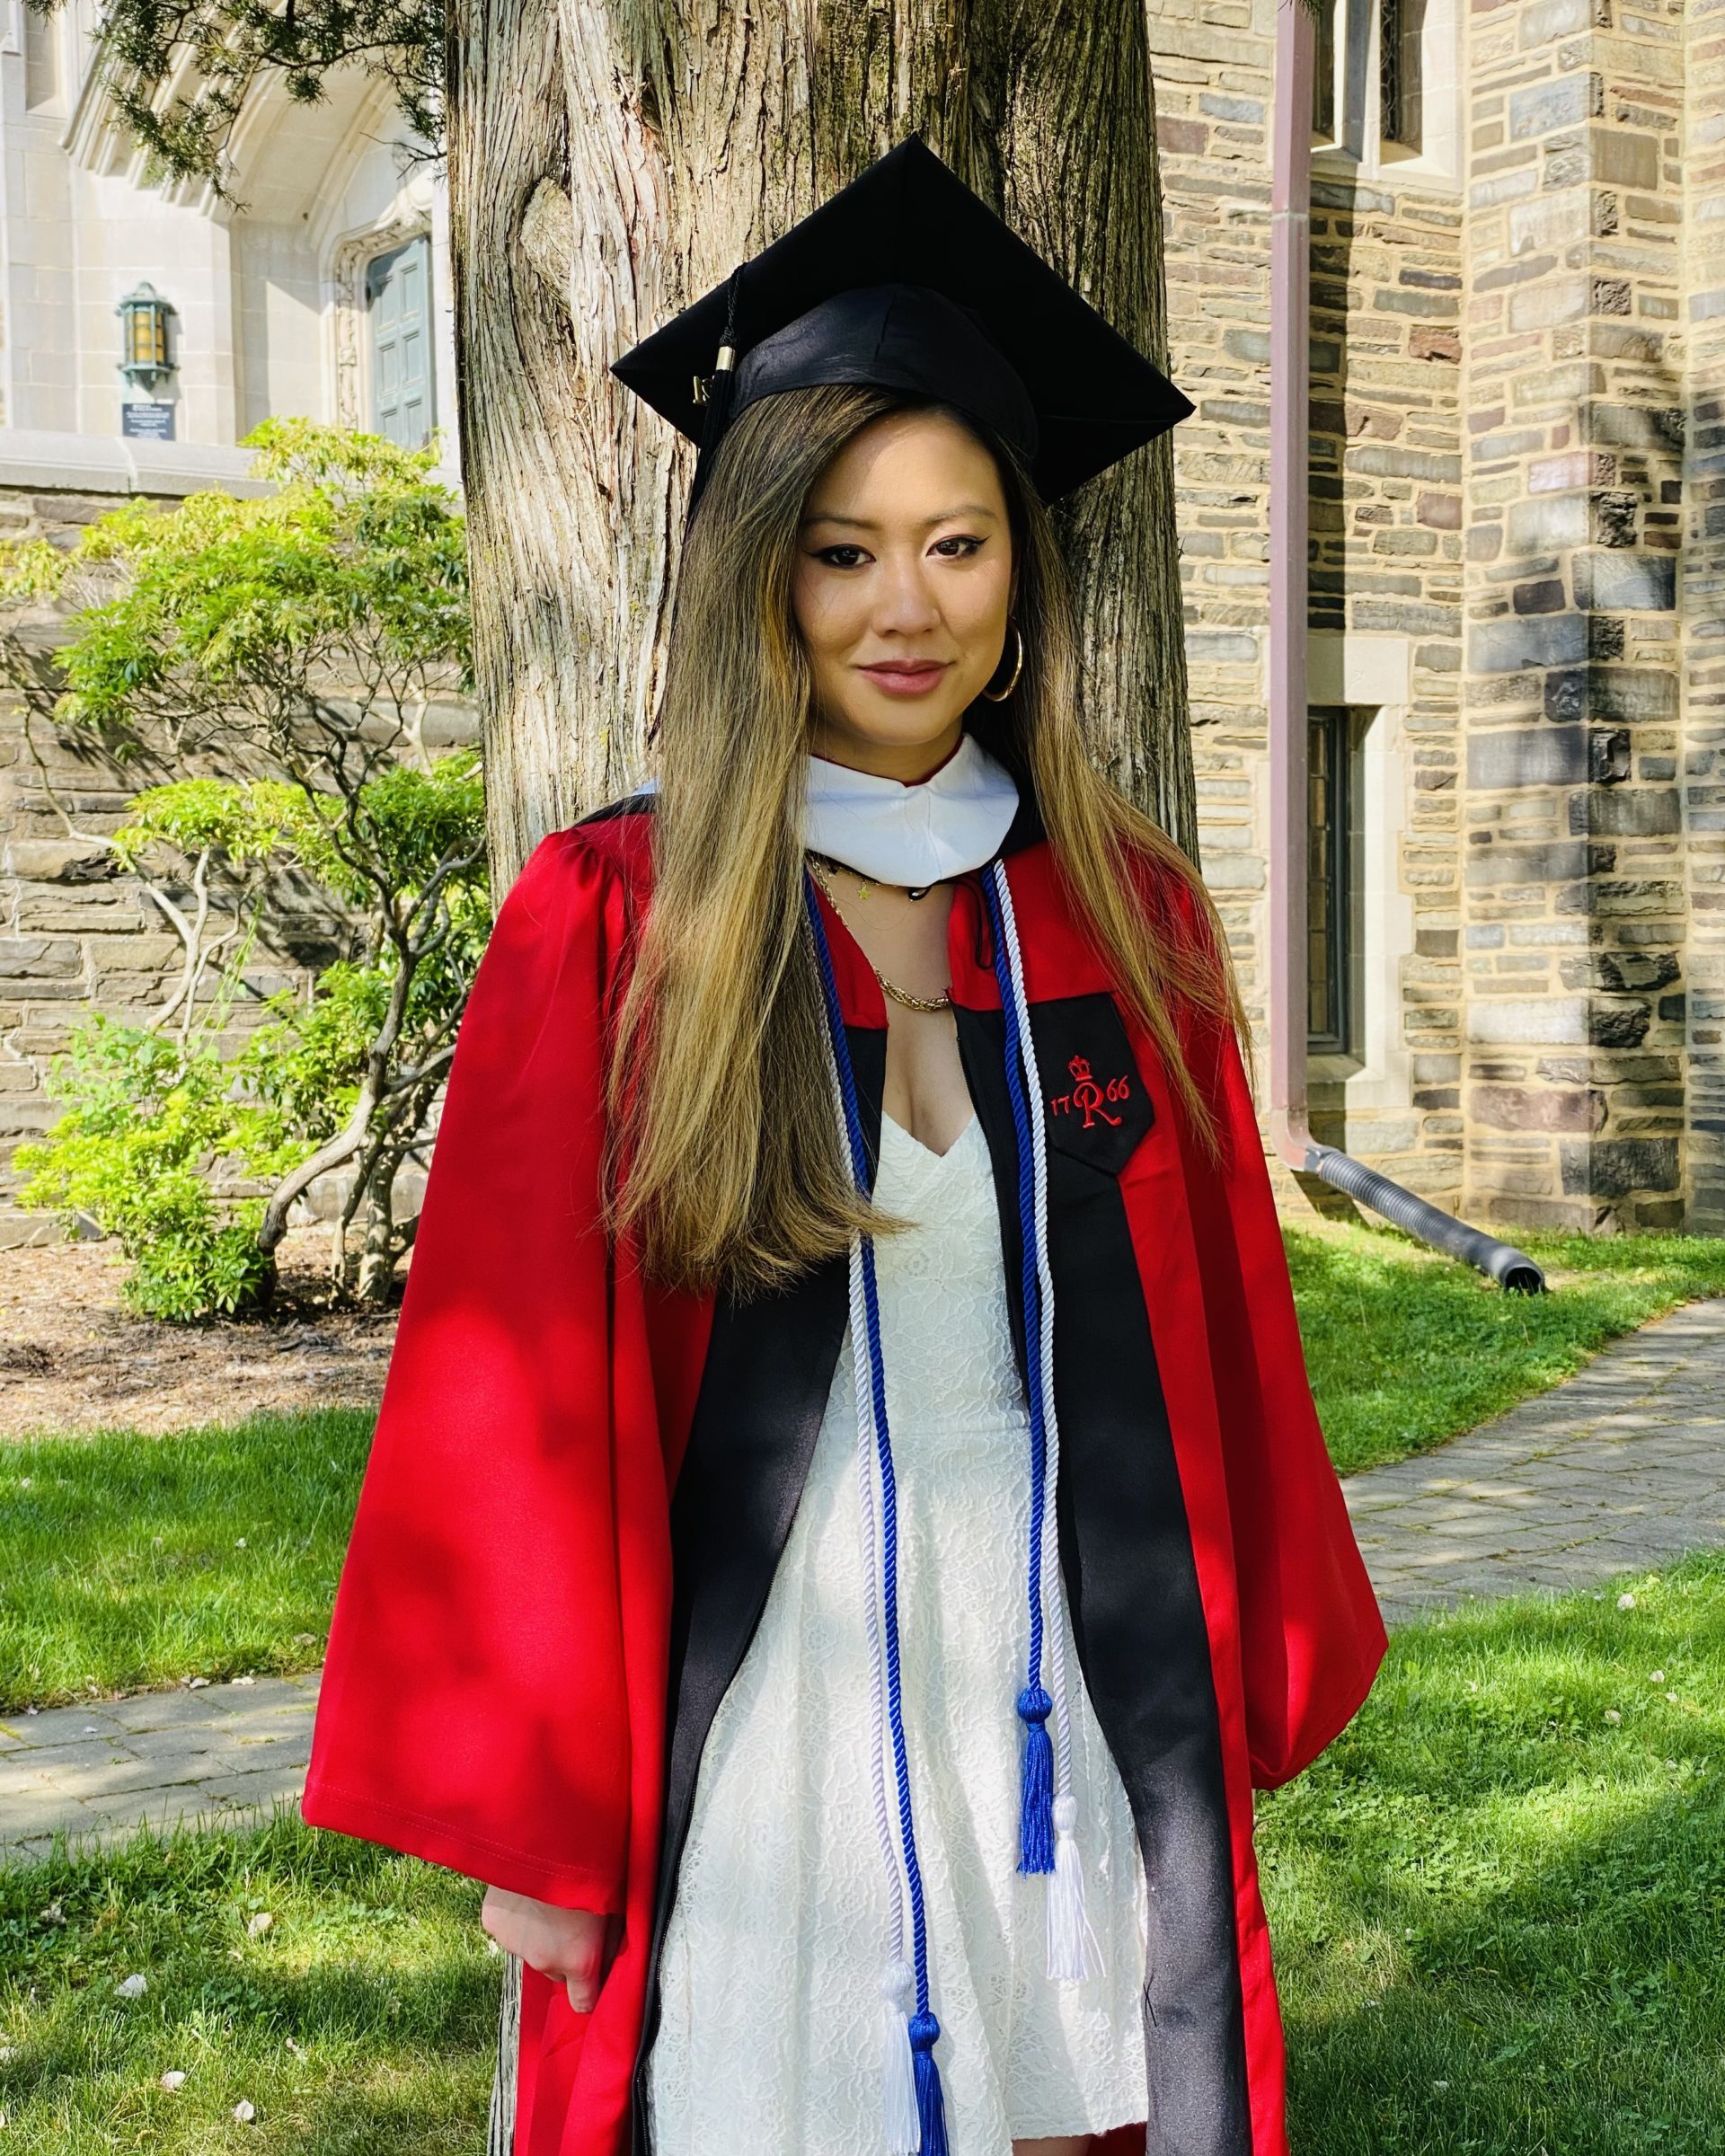 smiling girl wearing red graduation gown and black graduation cap